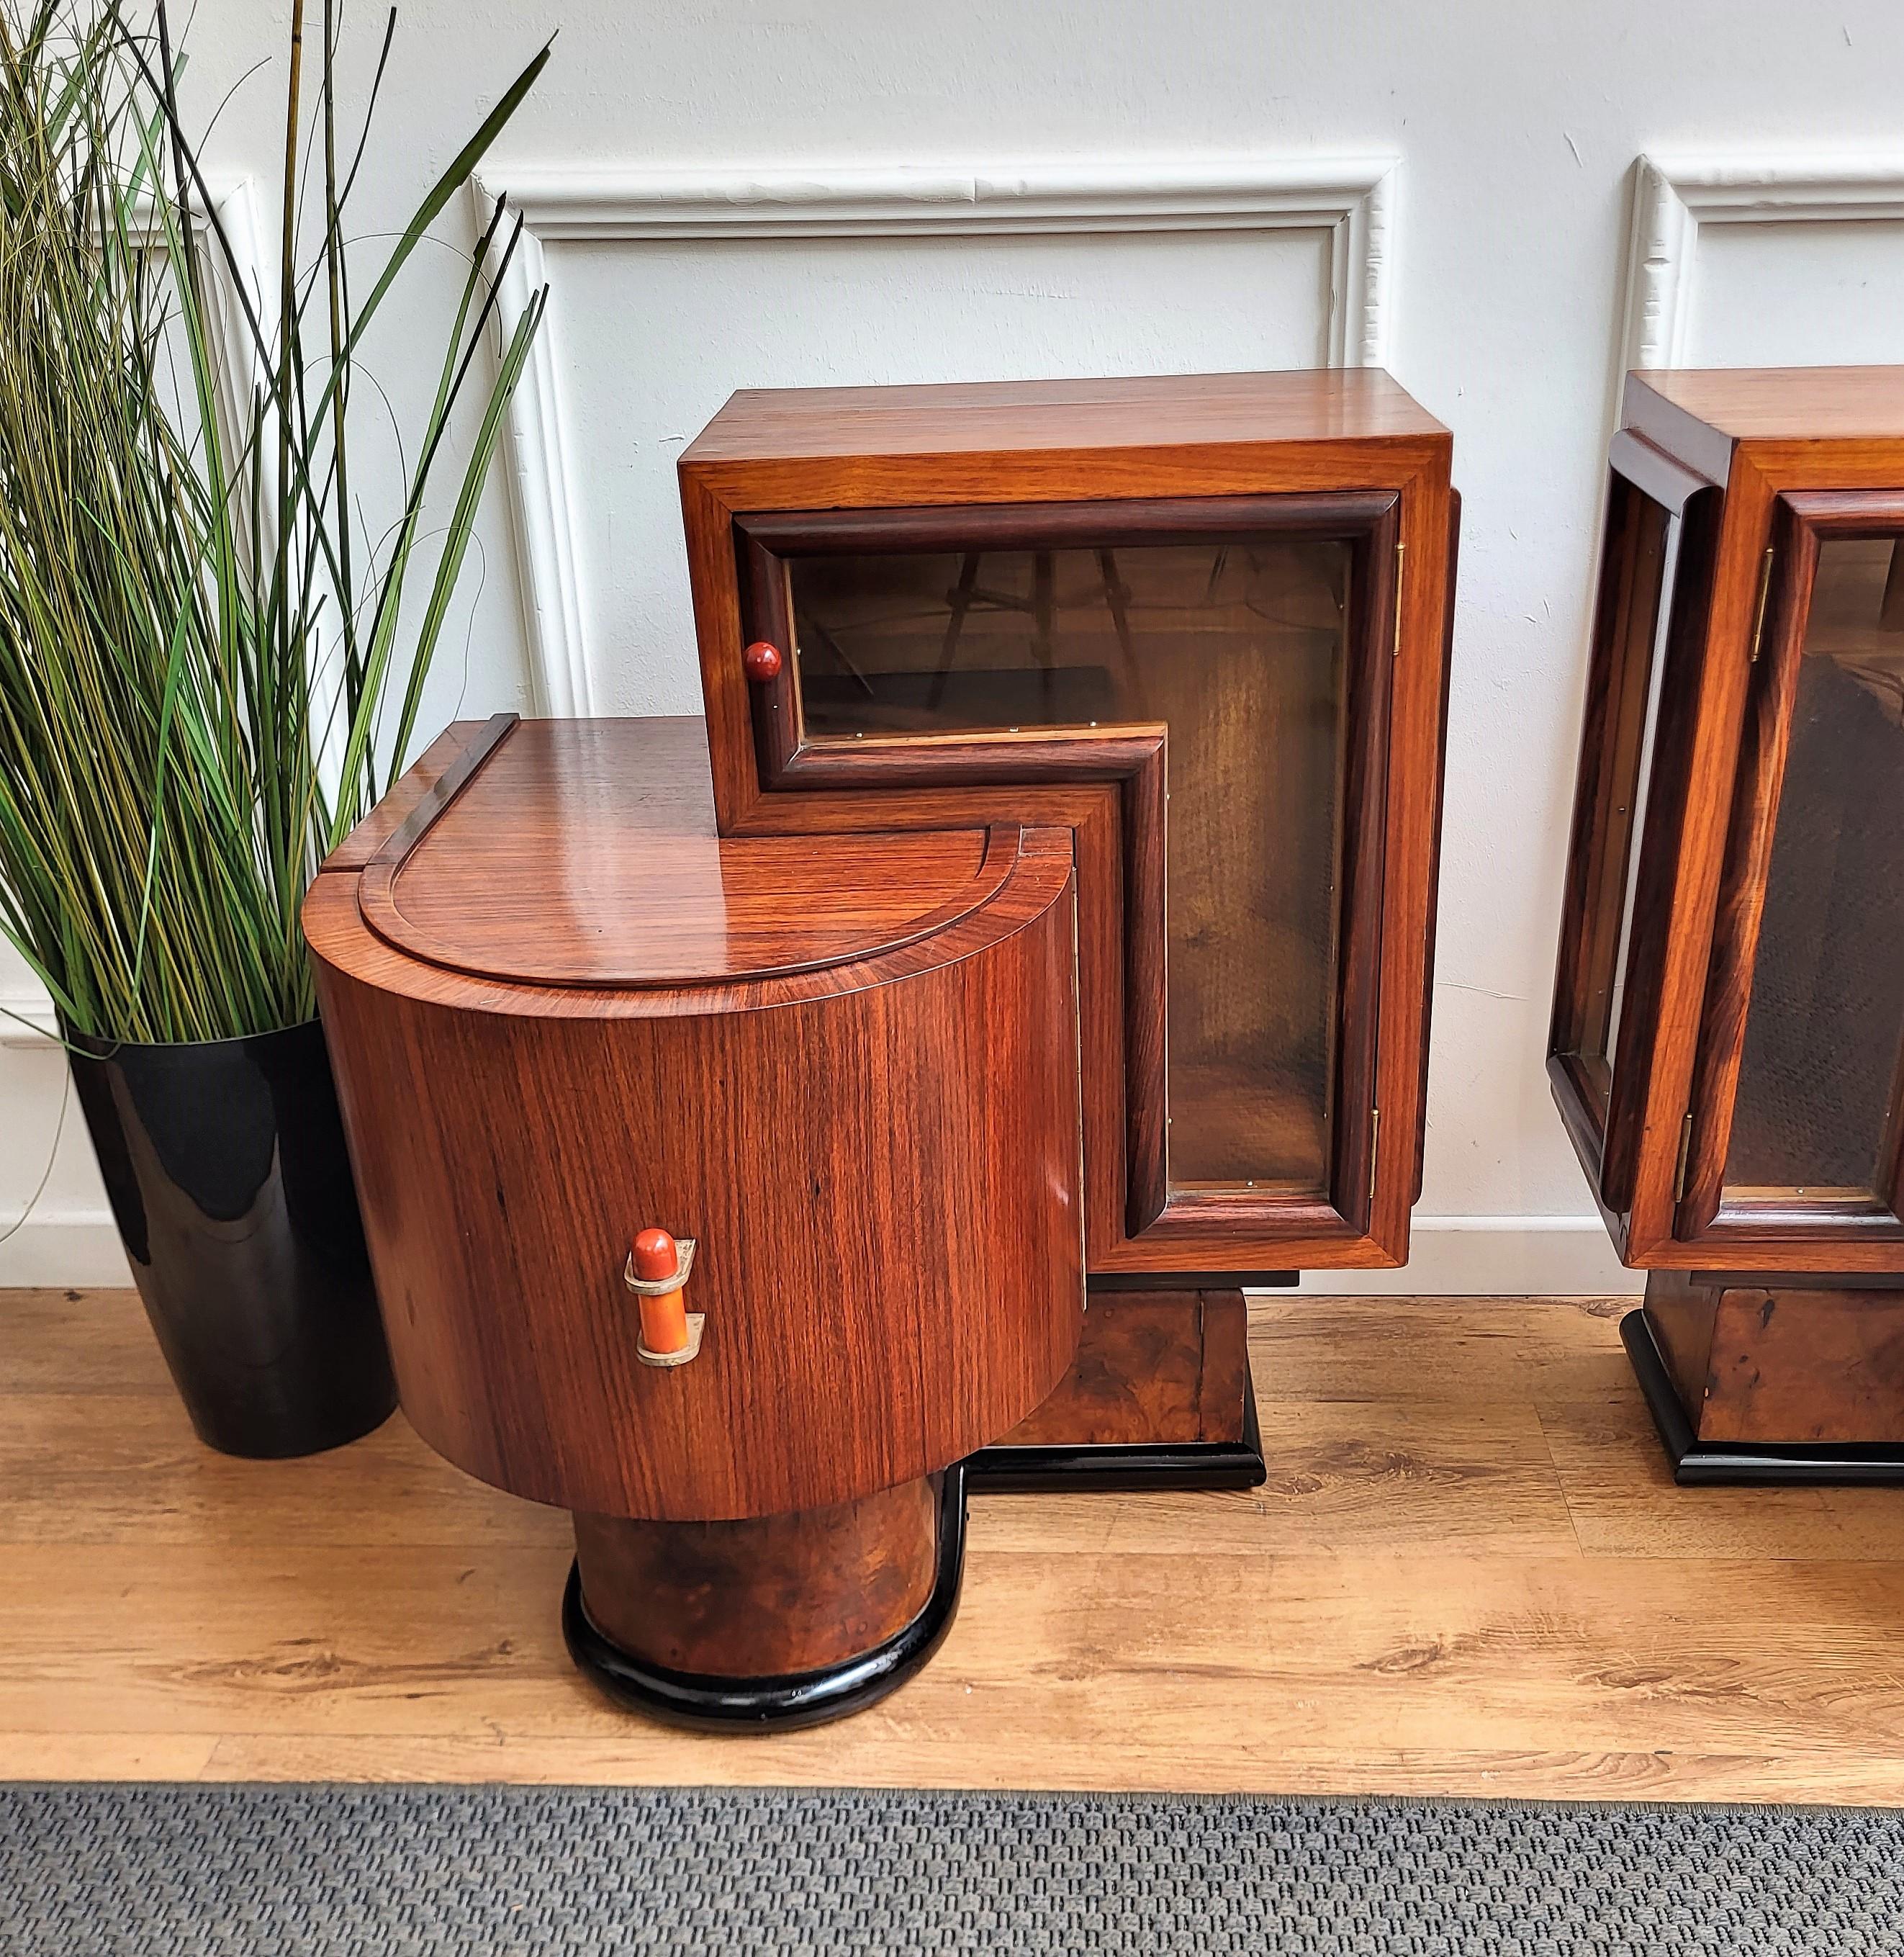 Very important, elegant and refined pair of Italian 1940s Art Deco bedside tables with great design shape of the glass geometric side door and the curved front door with the bold handles all in typical Art Deco style. This night stands make a great